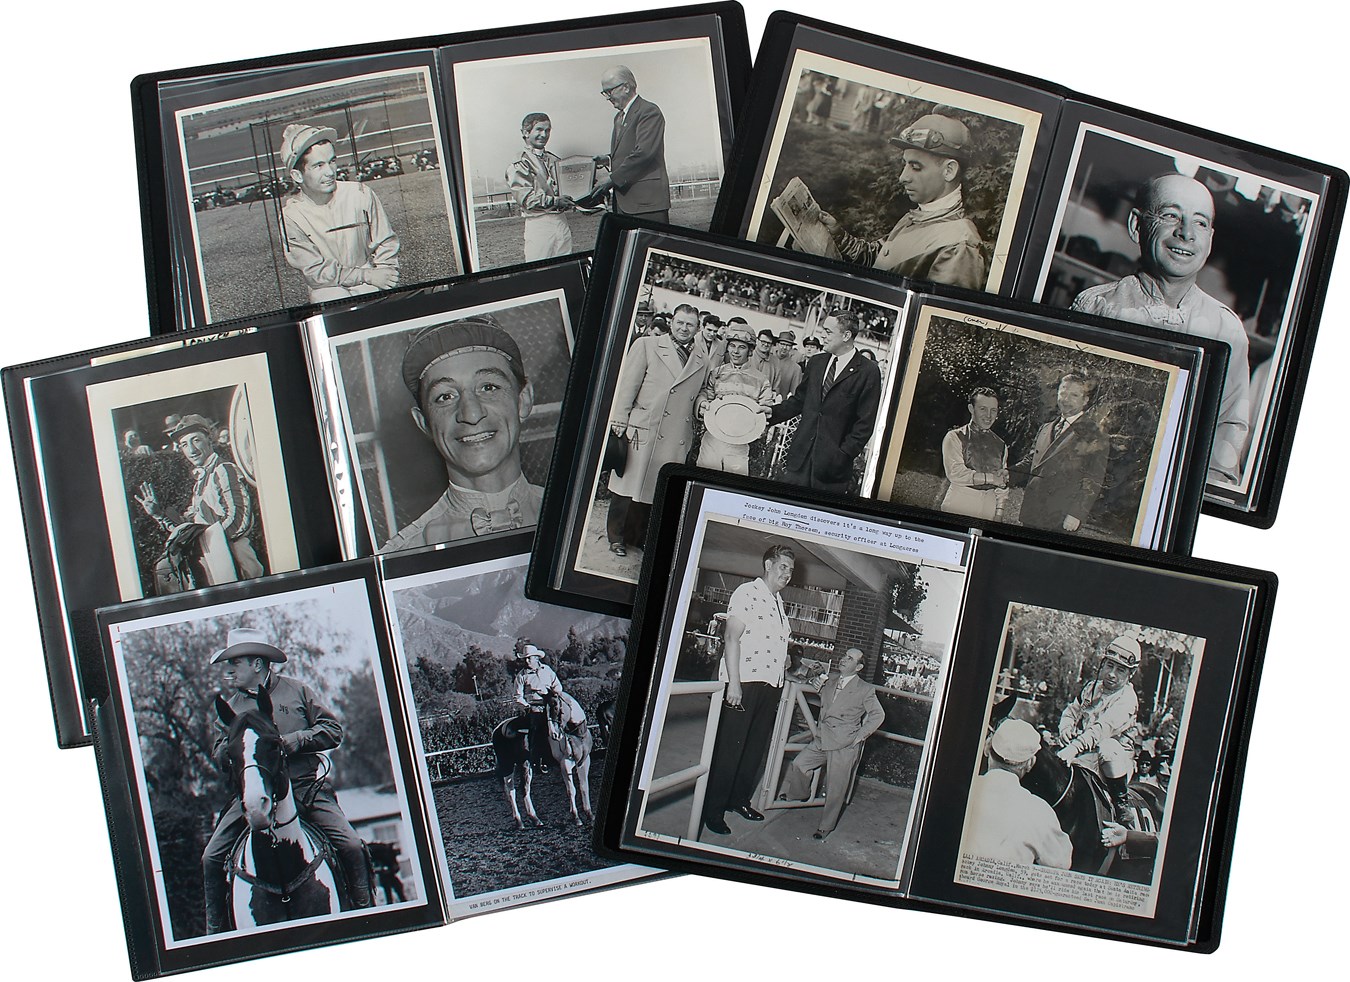 - Spectacular Collection of Horse Racing Photographs of Hall of Fame Jockey & Trainers (193) - Several by Bert Morgan